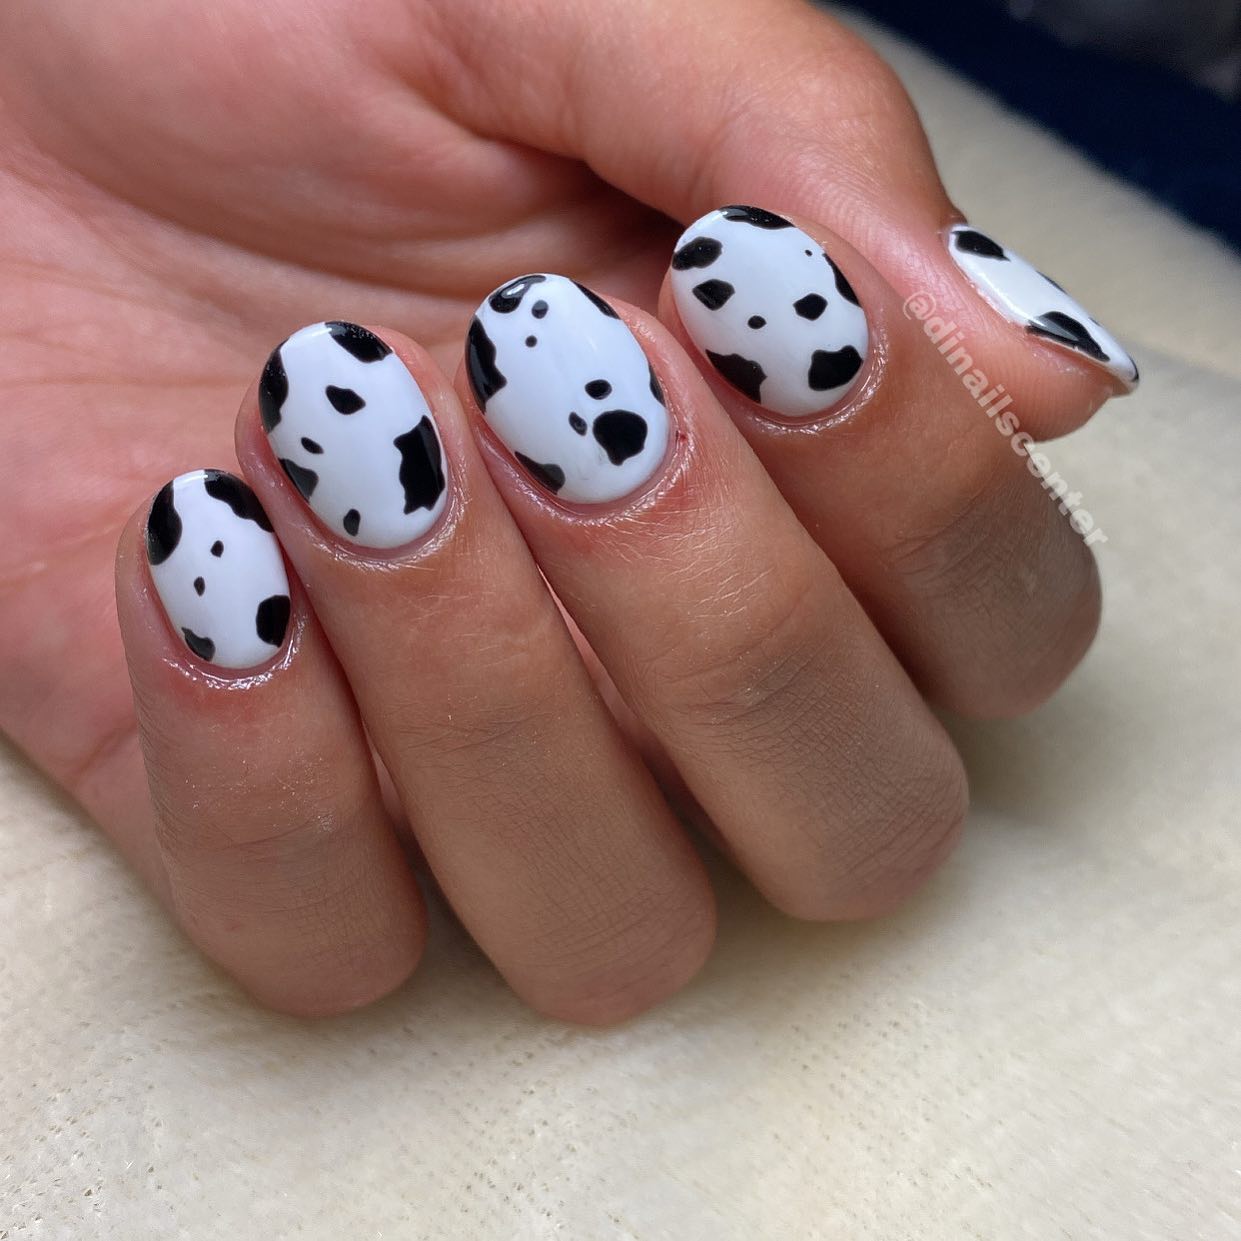 We love the oval shape of these nails! It's such a great way to make your hands look longer and more slender. The cow print is super cute and classic, so why not applying them?